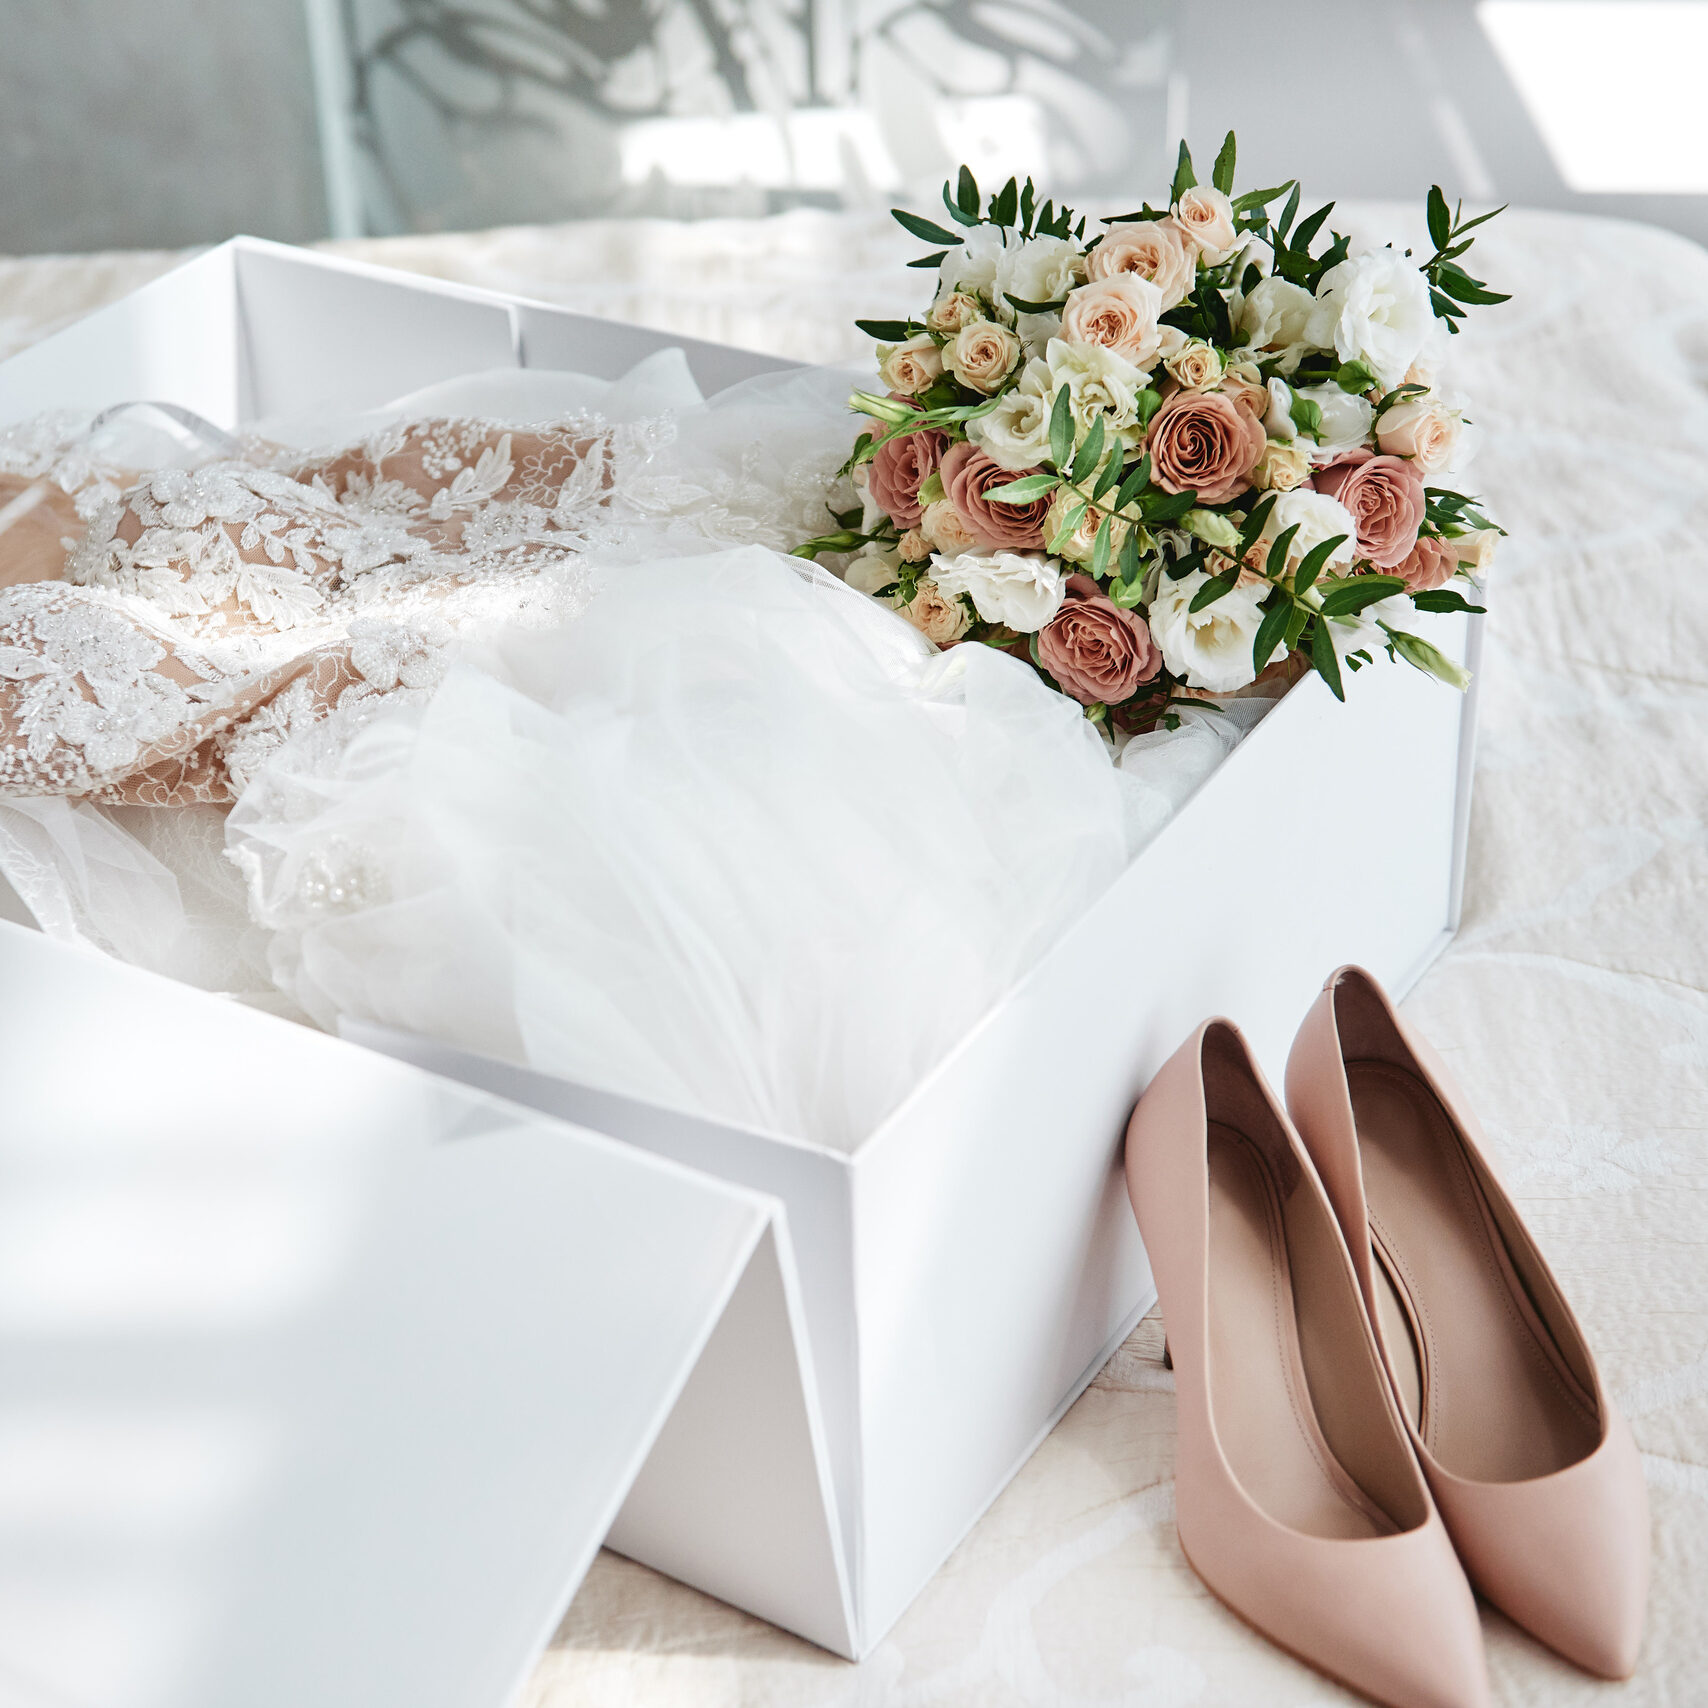 Luxury wedding dress in an open, white box with bouquet leaning on the side.  In front of the box is a pair of beige women's shoes.